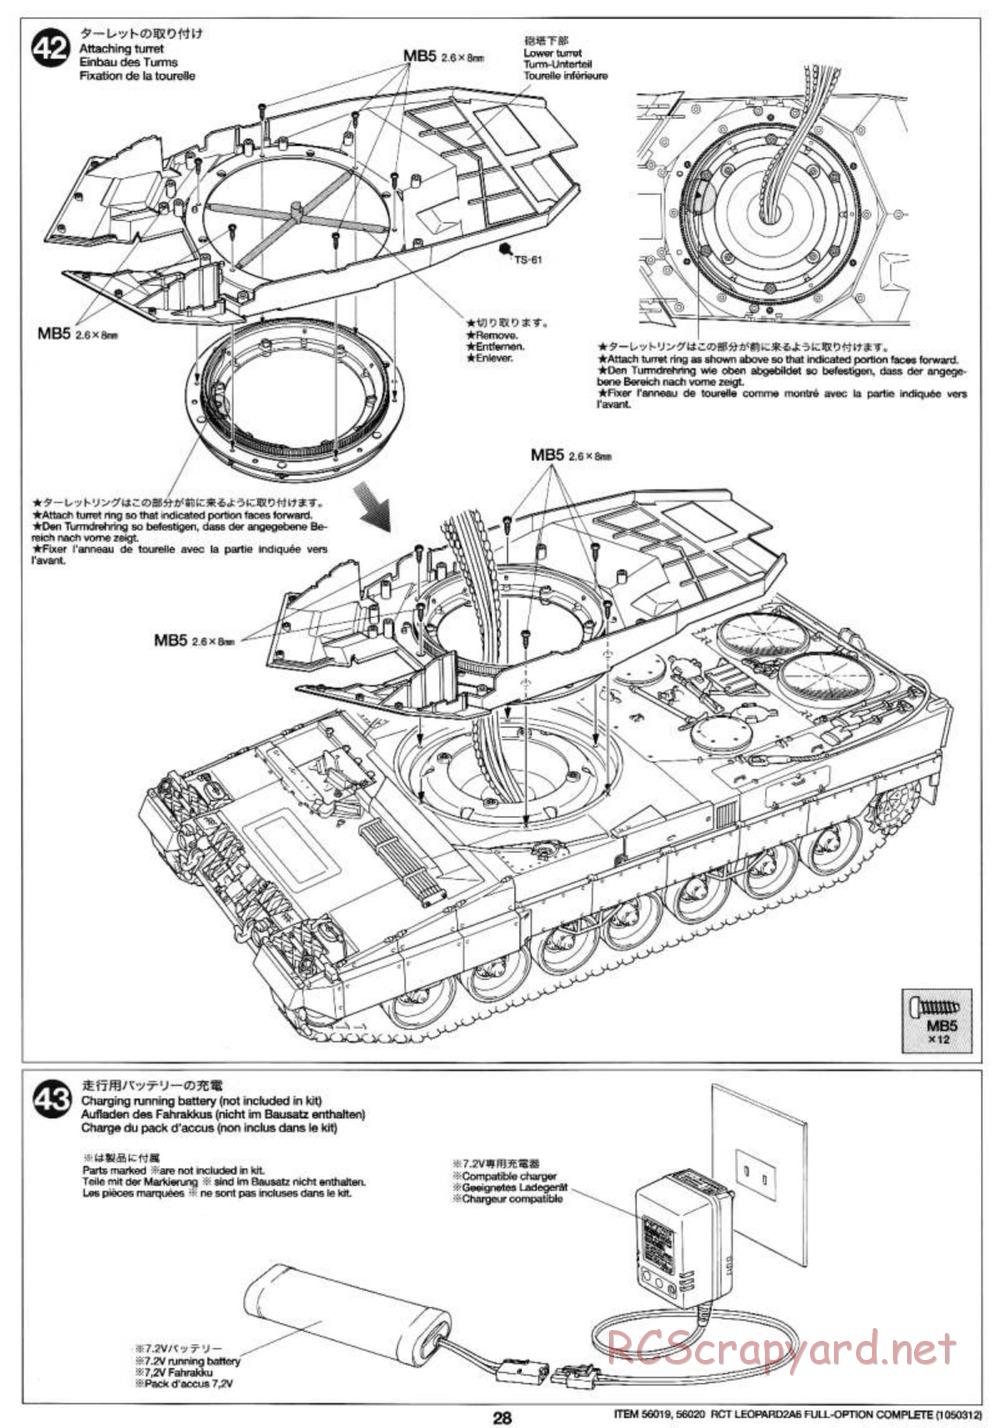 Tamiya - Leopard 2 A6 - 1/16 Scale Chassis - Manual - Page 28